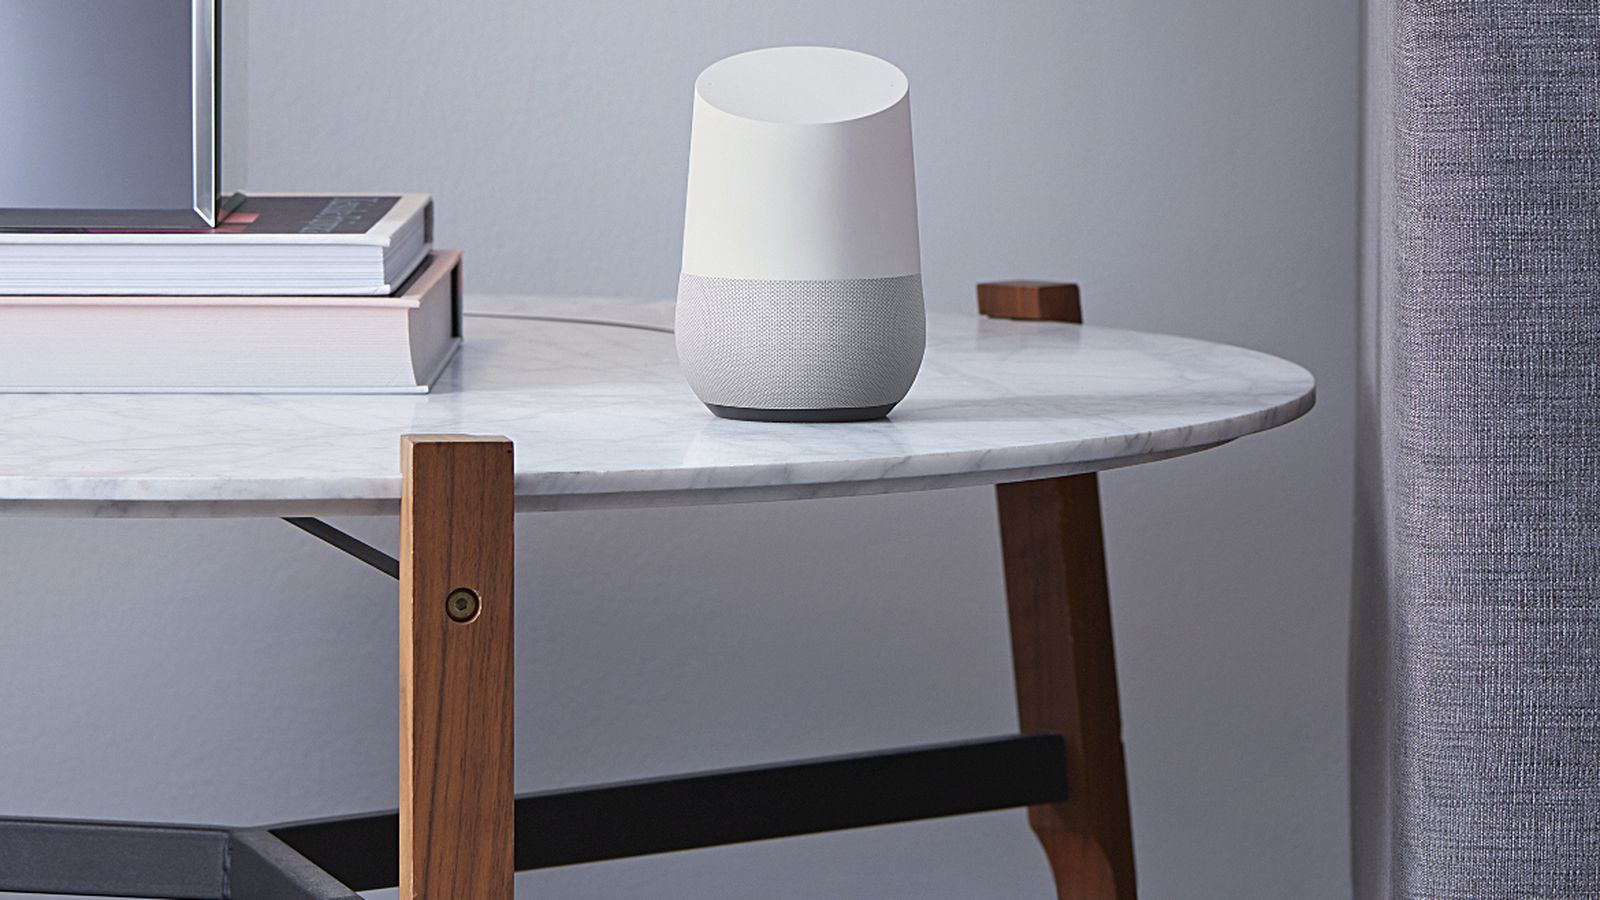 Up your smarthome game with google home